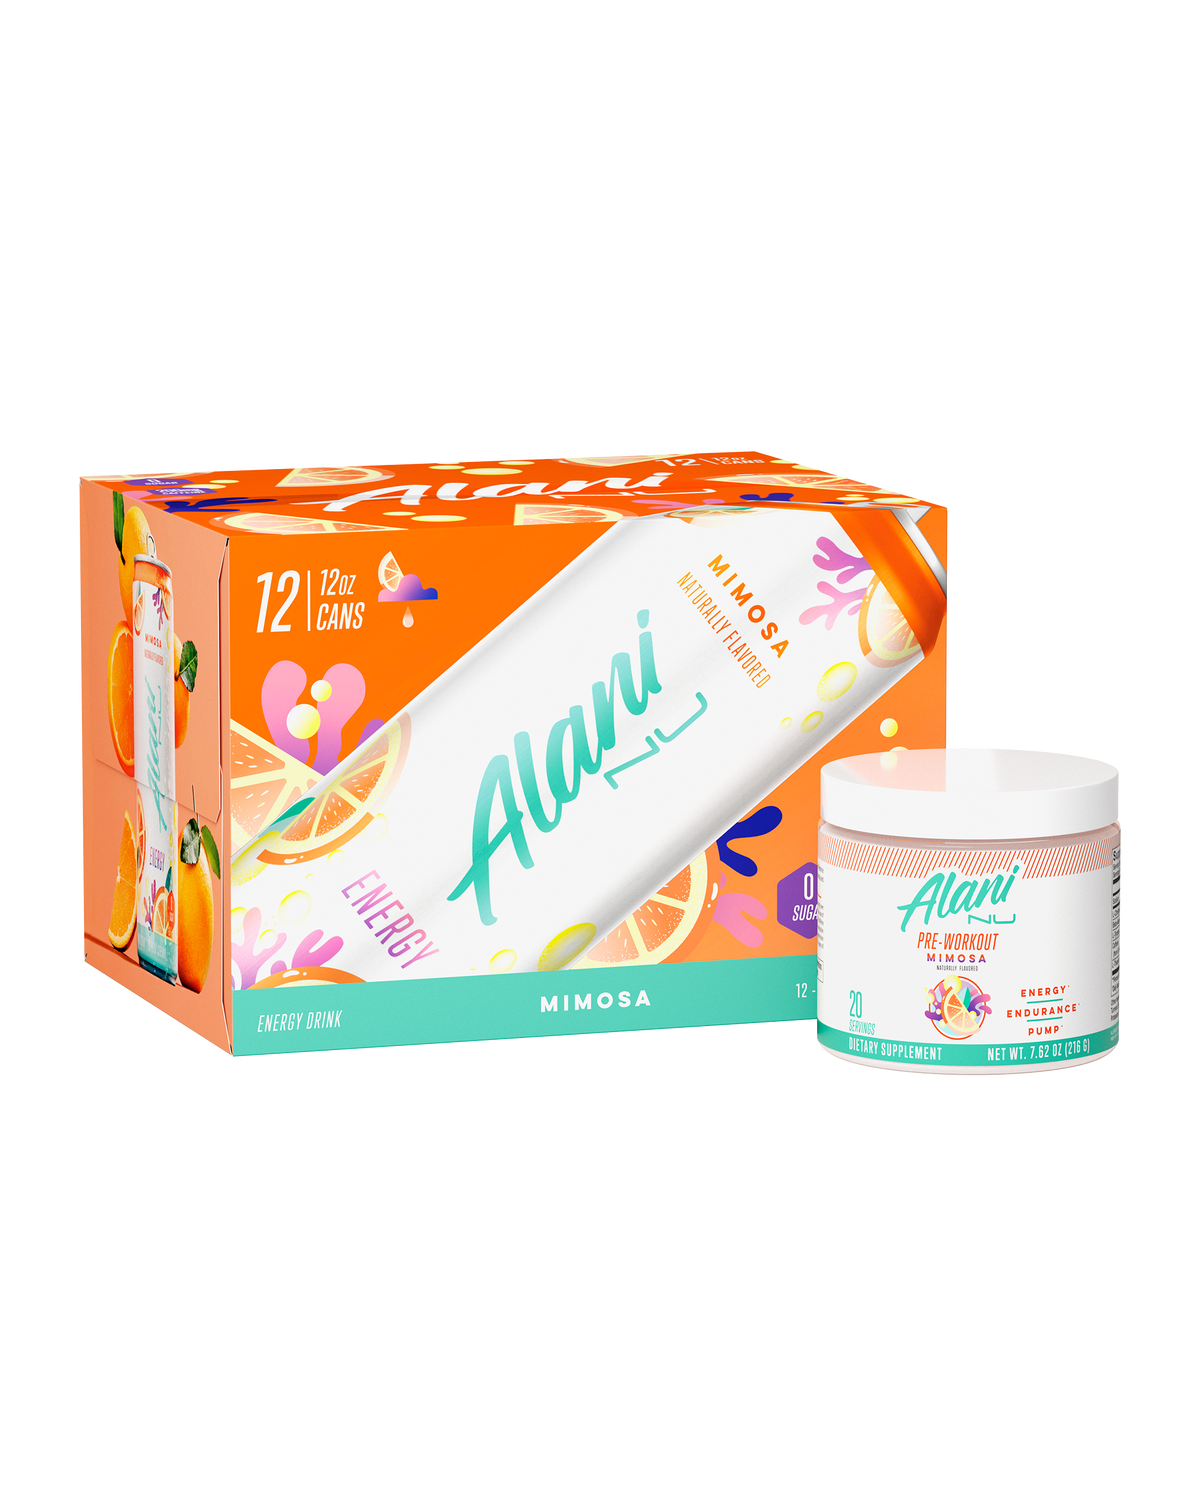 A 12 pack of Alani Nu&#39;s Mimosa-flavored energy drinks and a container of Alani pre-workout supplement in Mimosa flavor, both featuring vibrant, citrus-themed graphics.